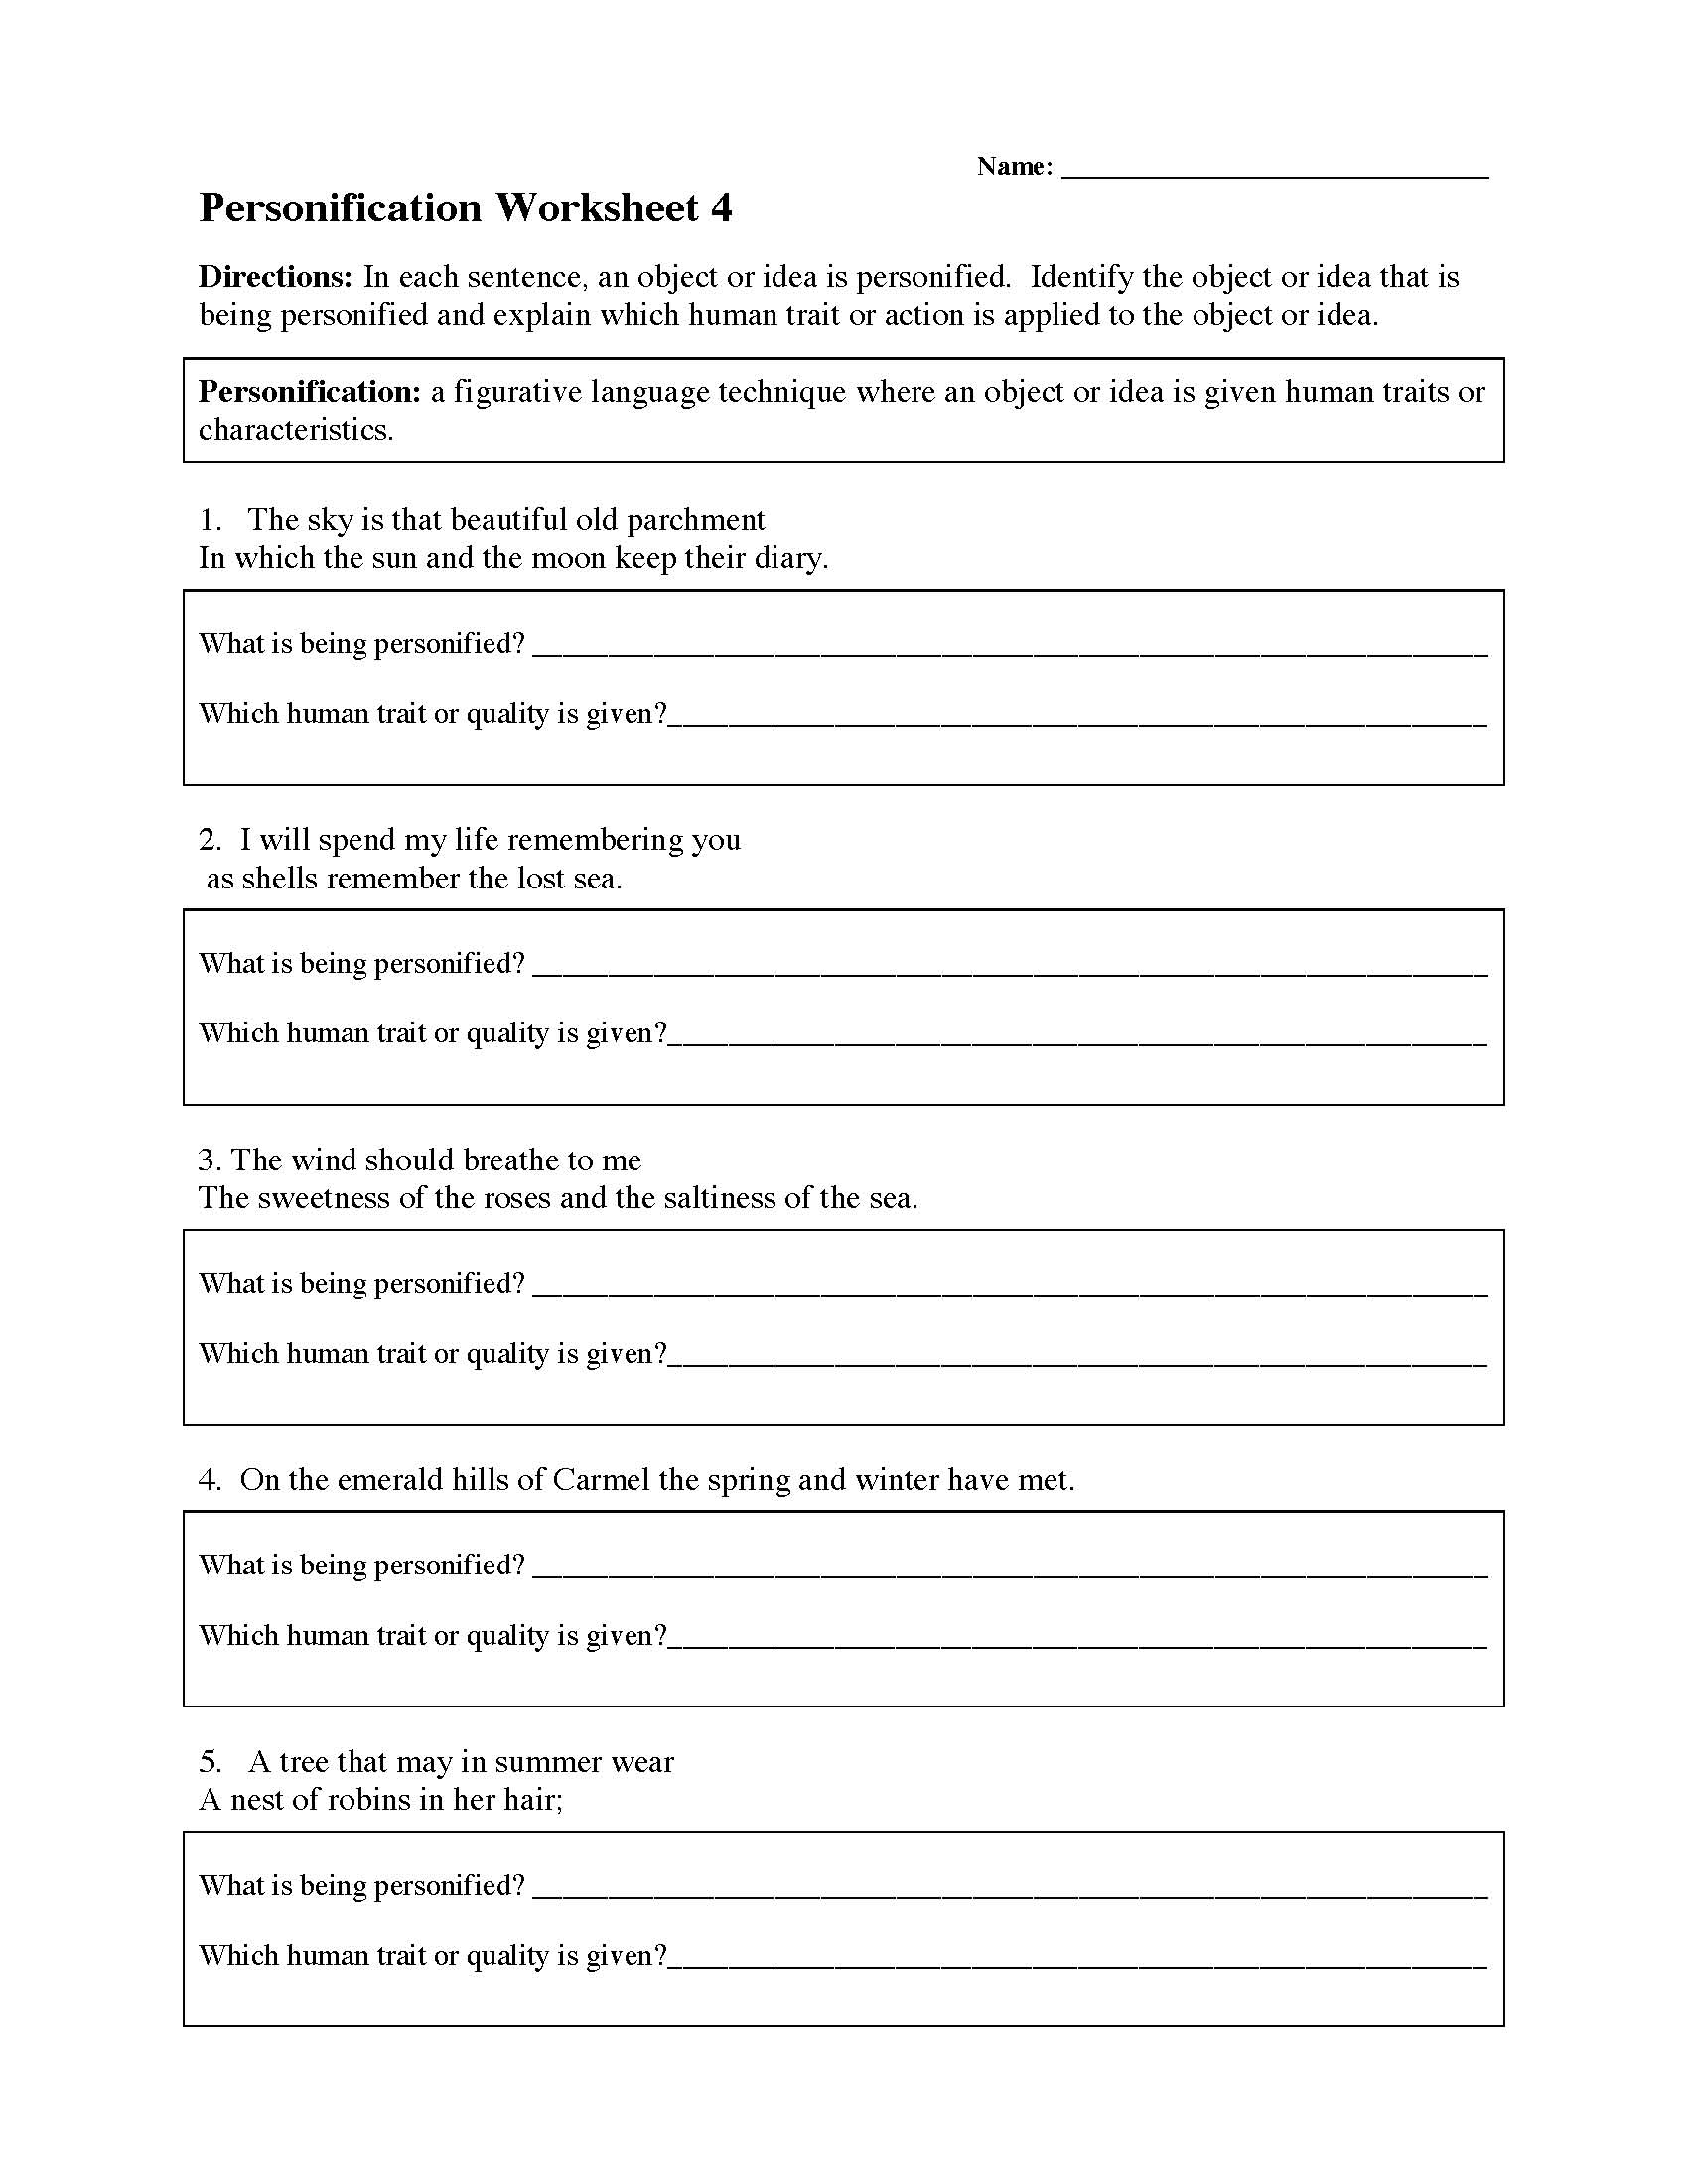 This is a preview image of Personification Worksheet 4. Click on it to enlarge it or view the source file.